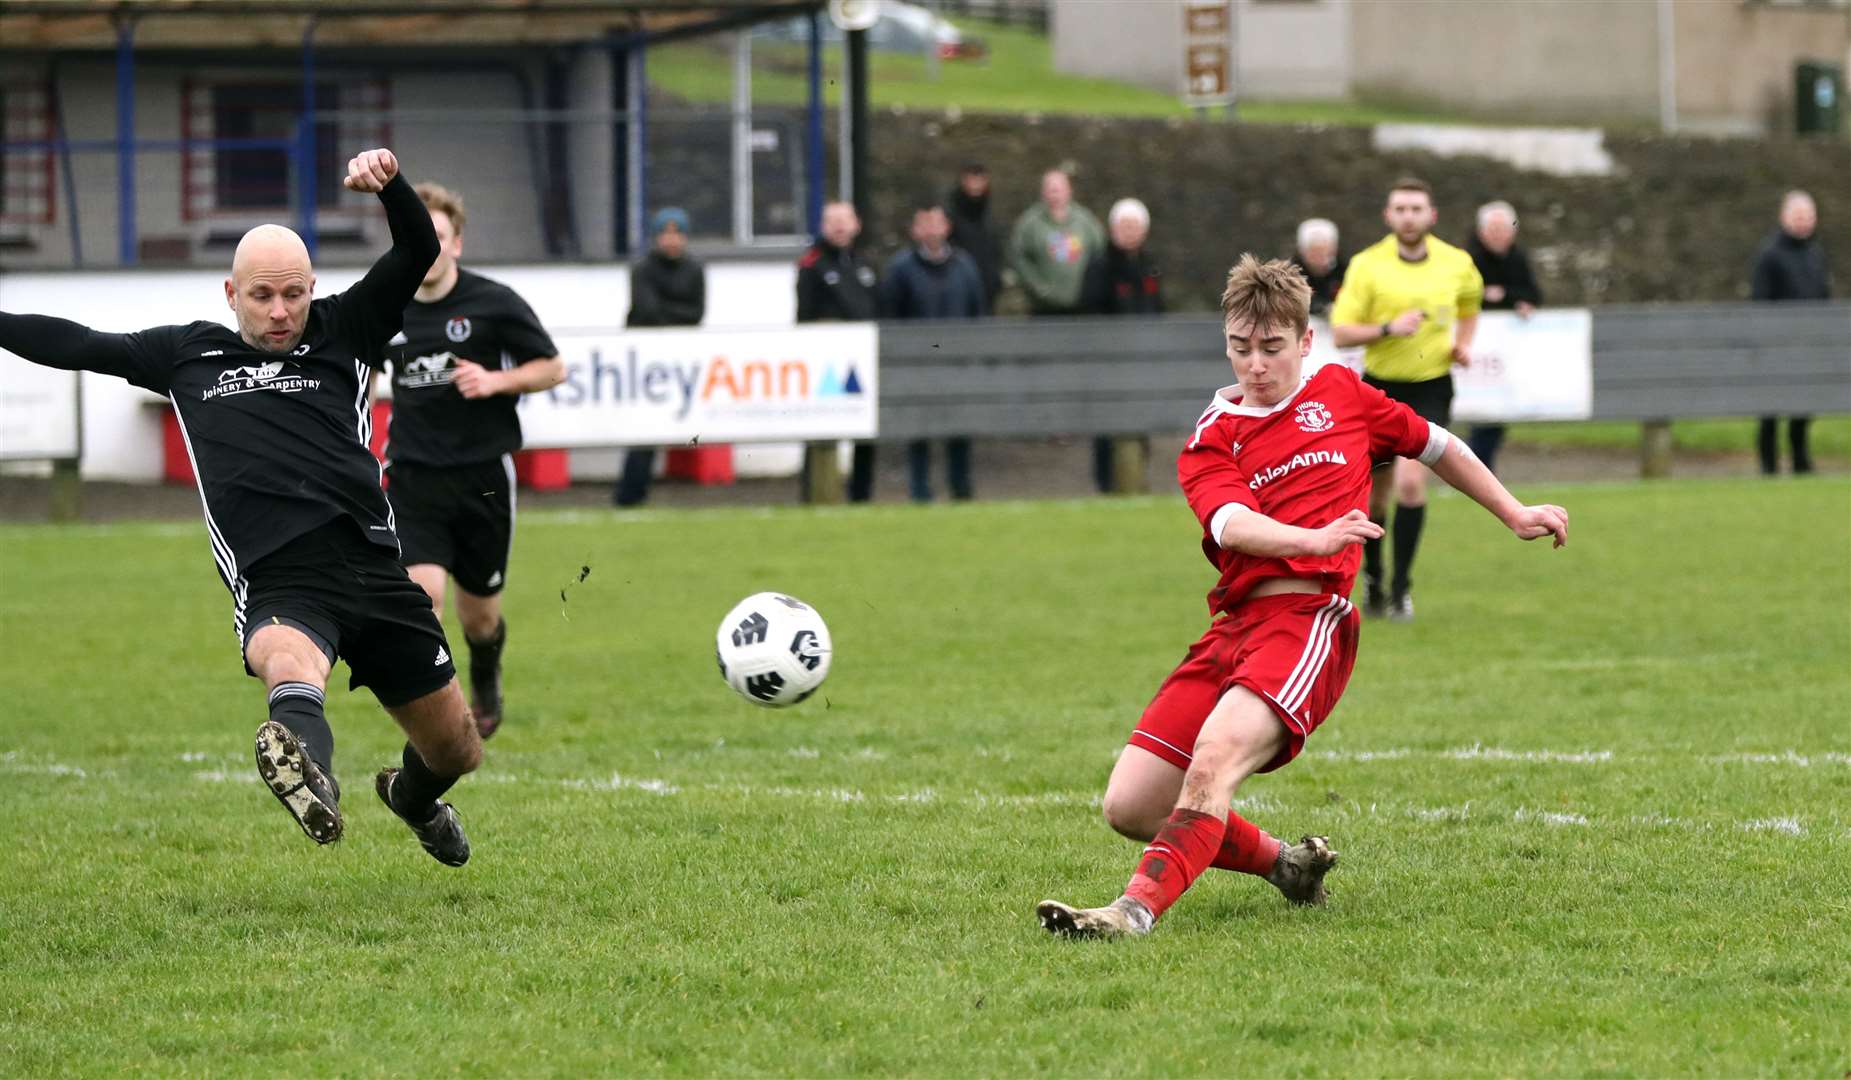 Thurso's Cameron Montgomery fires a shot which John Skinner of St Duthus tries to block. Picture: James Gunn